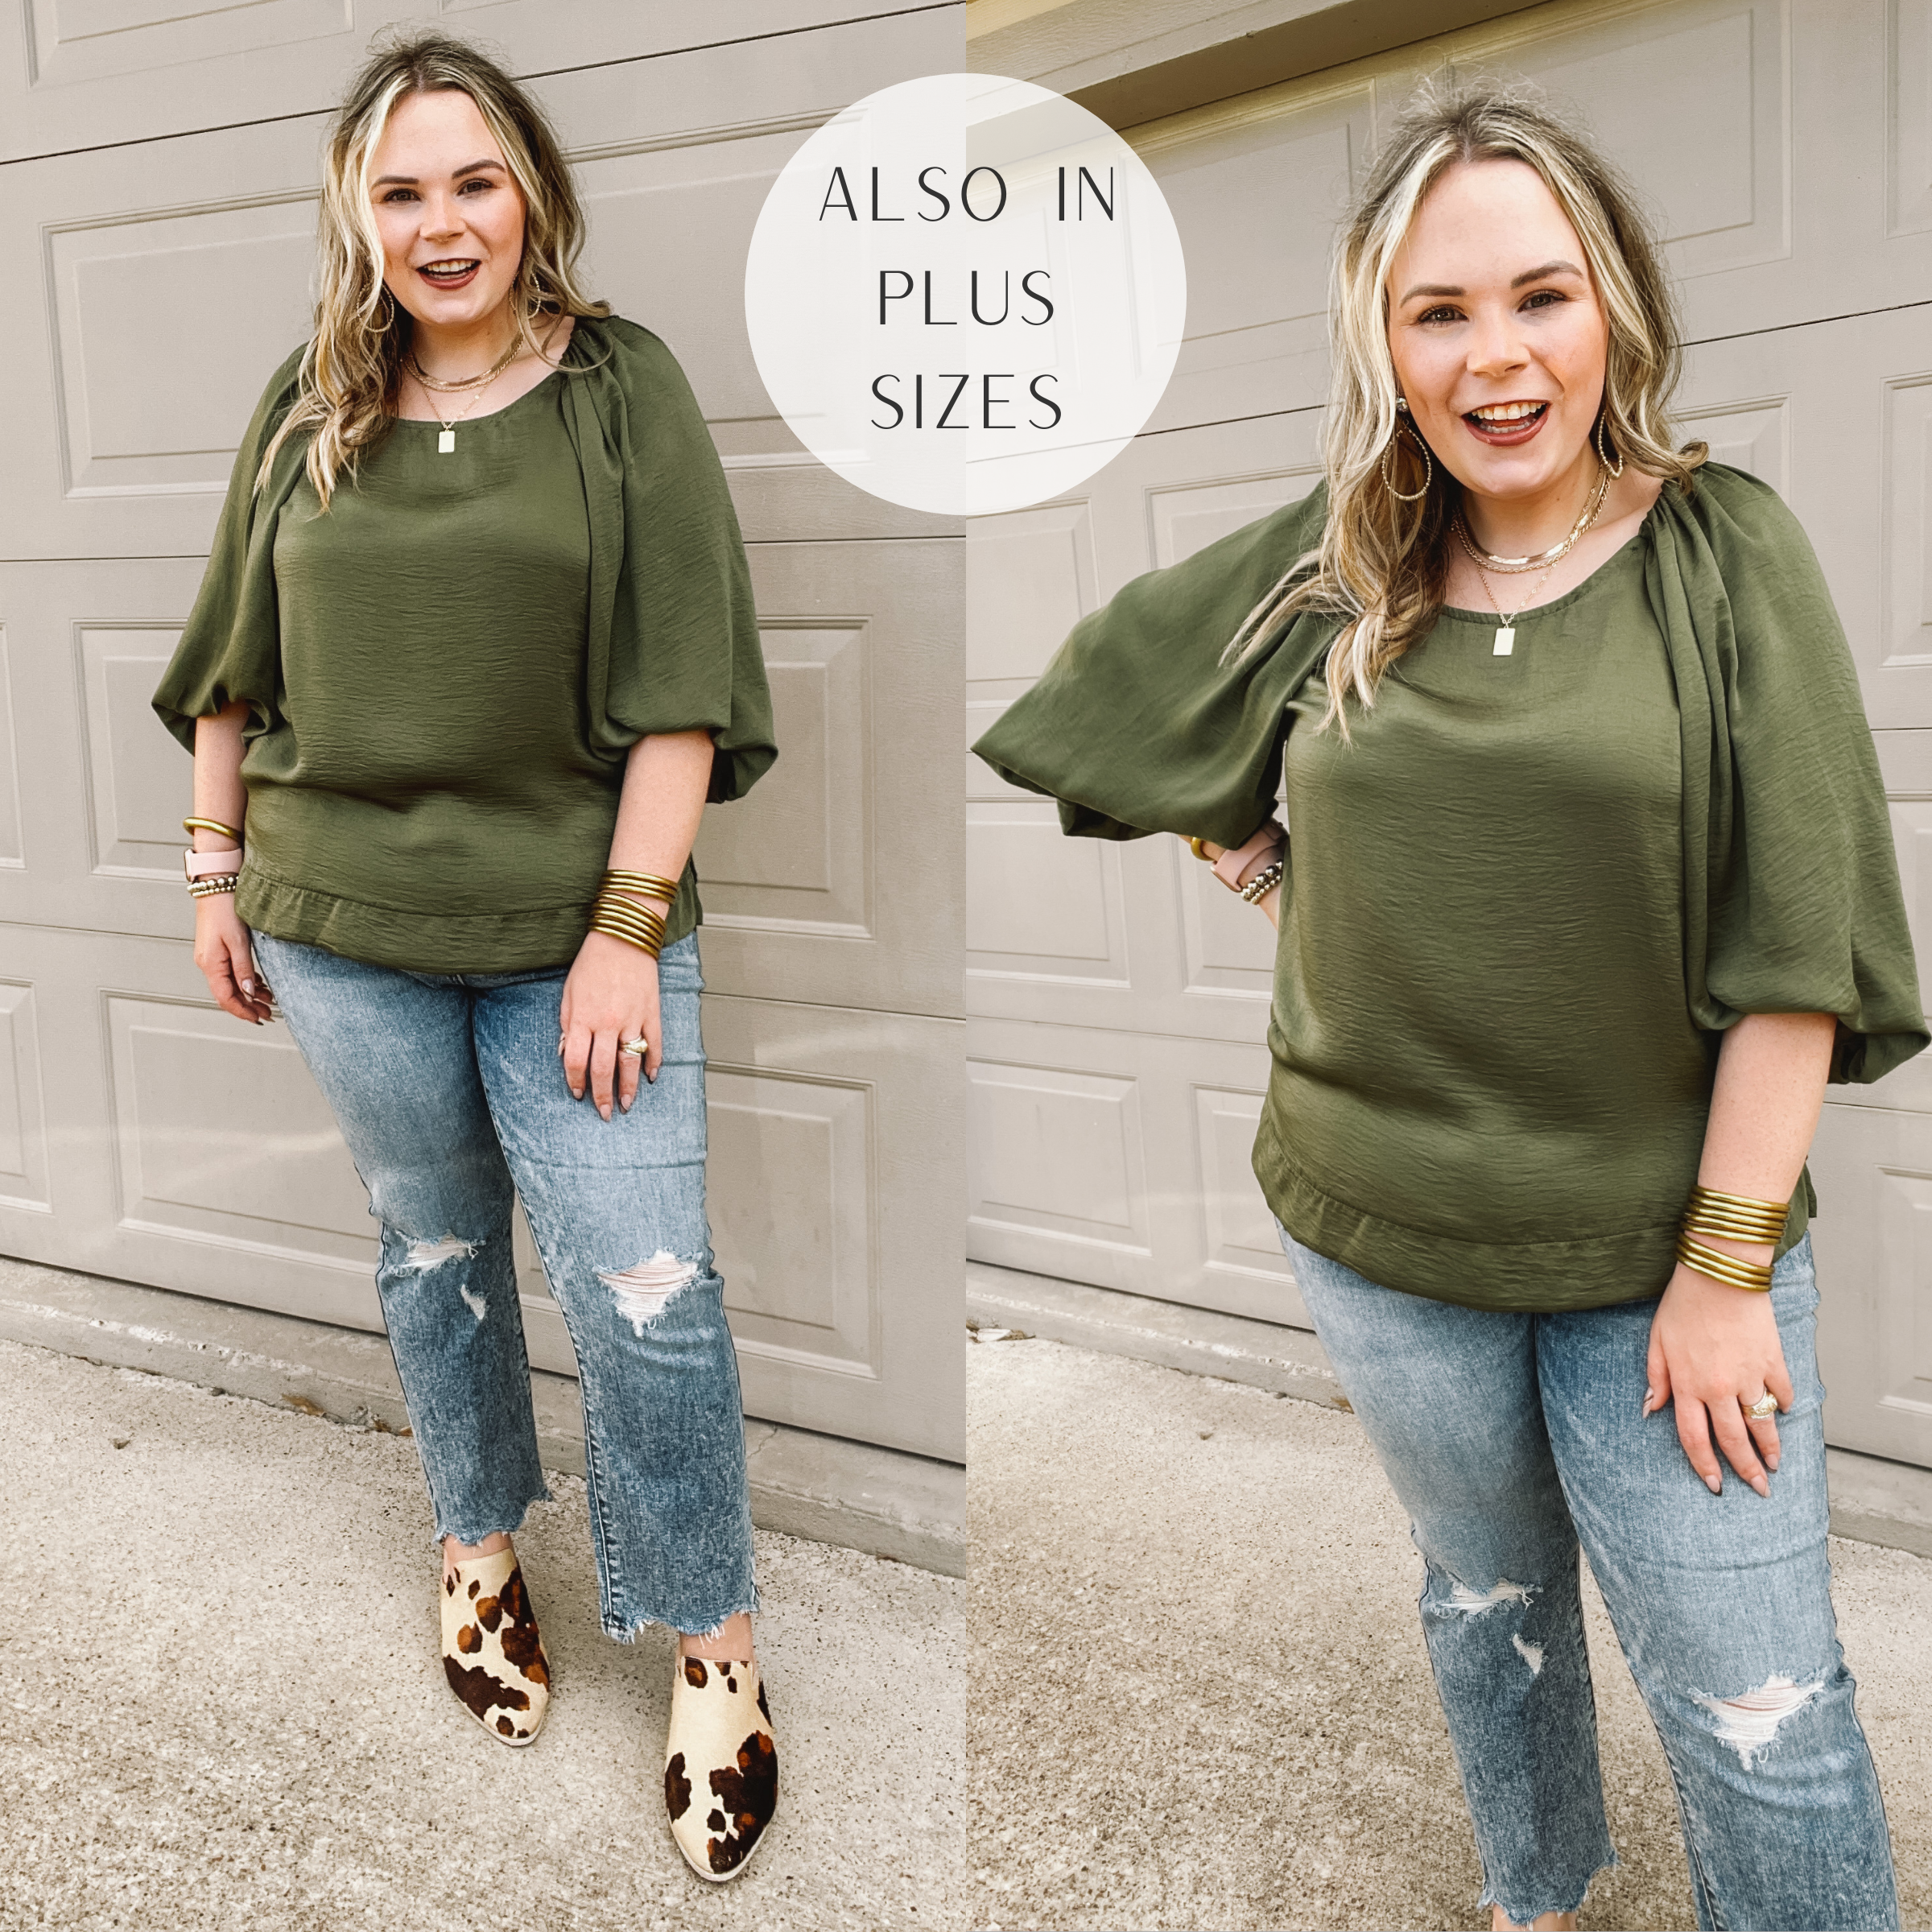 Model is wearing an olive green scoop neck blouse with balloon half sleeves. Model has it paired with distressed boyfriend jeans, animal print mules, and gold jewelry.